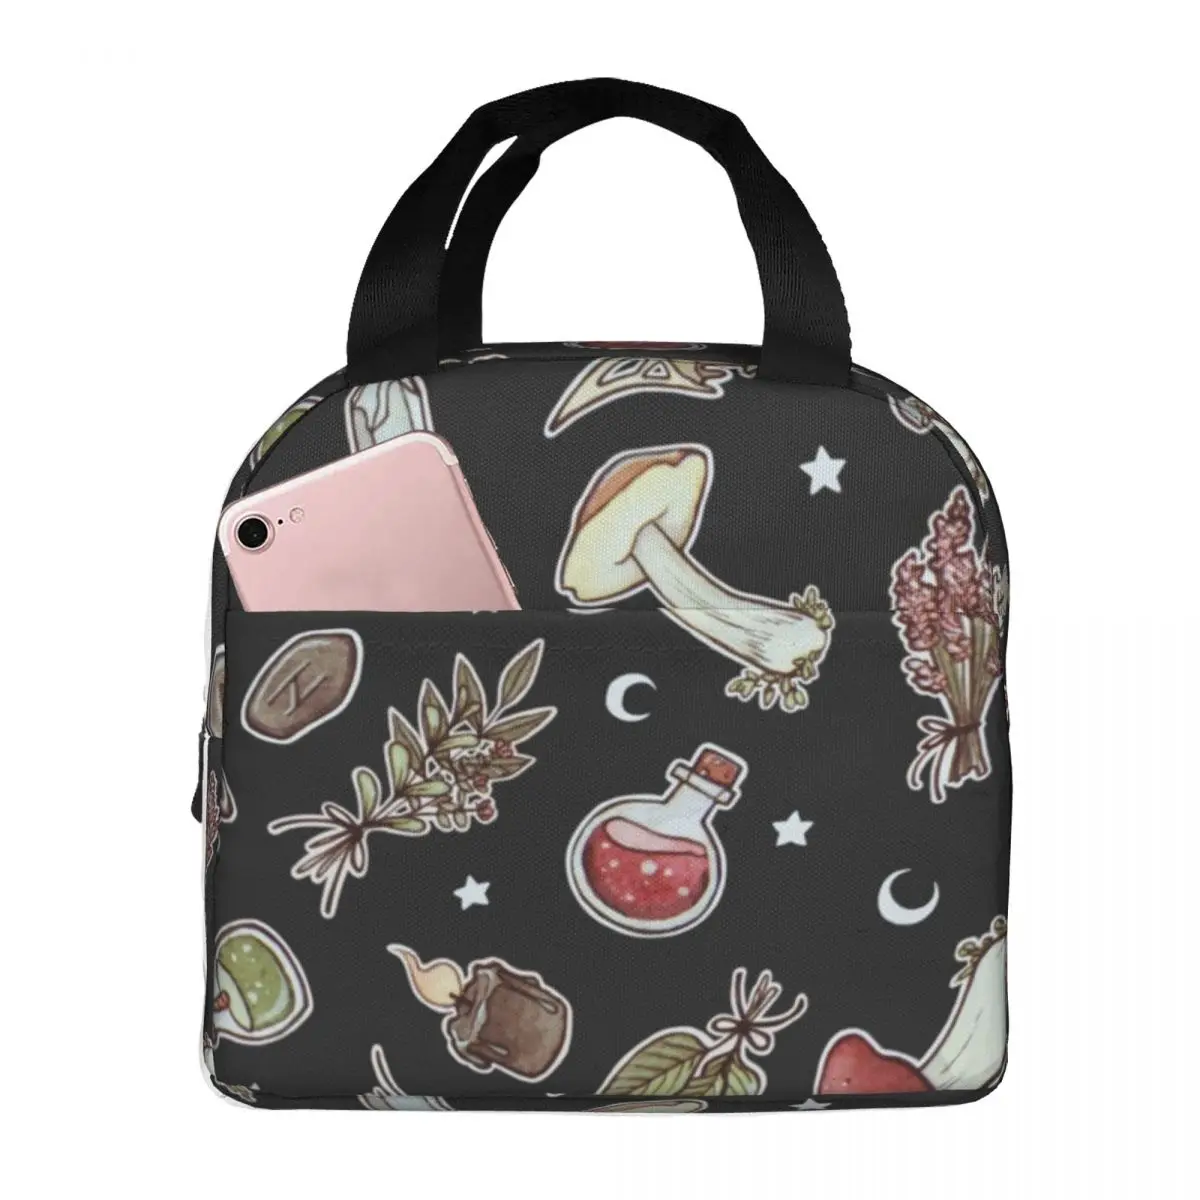 Lunch Bags for Women Kids Witchy Pattern Dark Mushroom Thermal Cooler Portable School Psychedelic Oxford Tote Food Bag